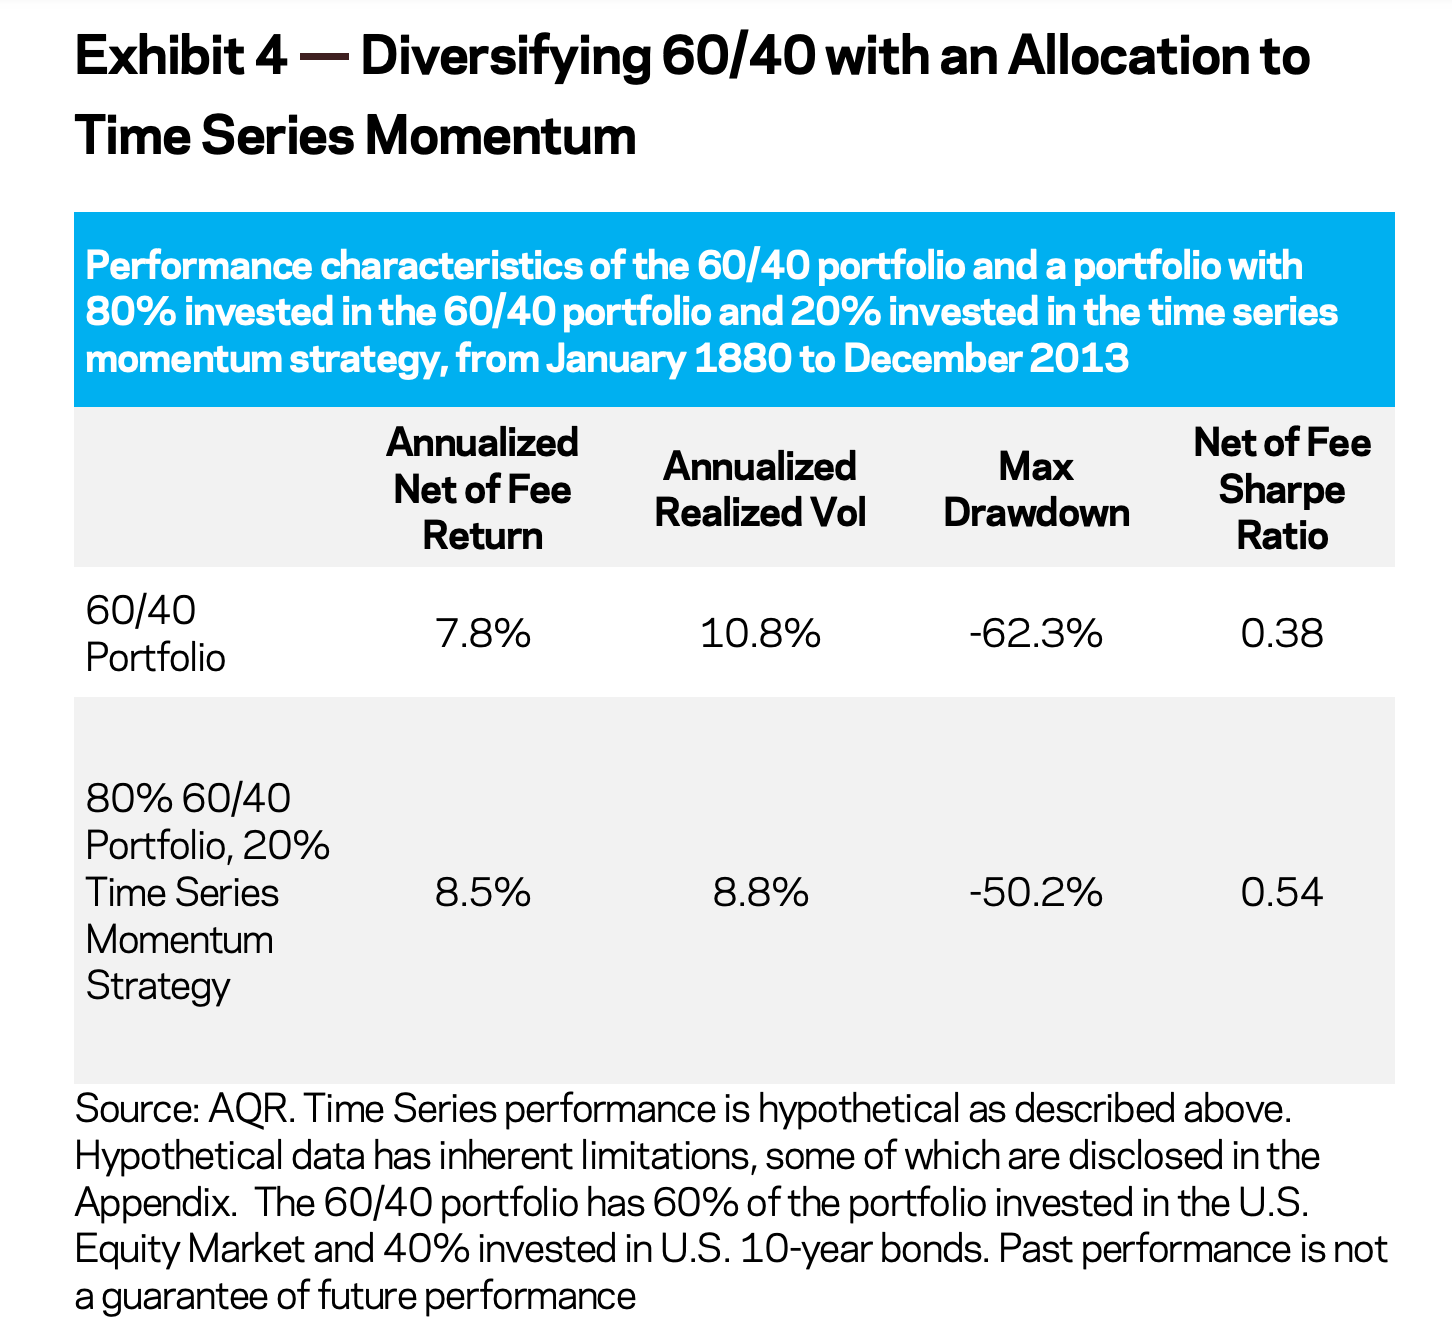 Diversifying a 60/40 Portfolio by adding 20% Managed Future Trend Following for a 50/30/20 Portfolio